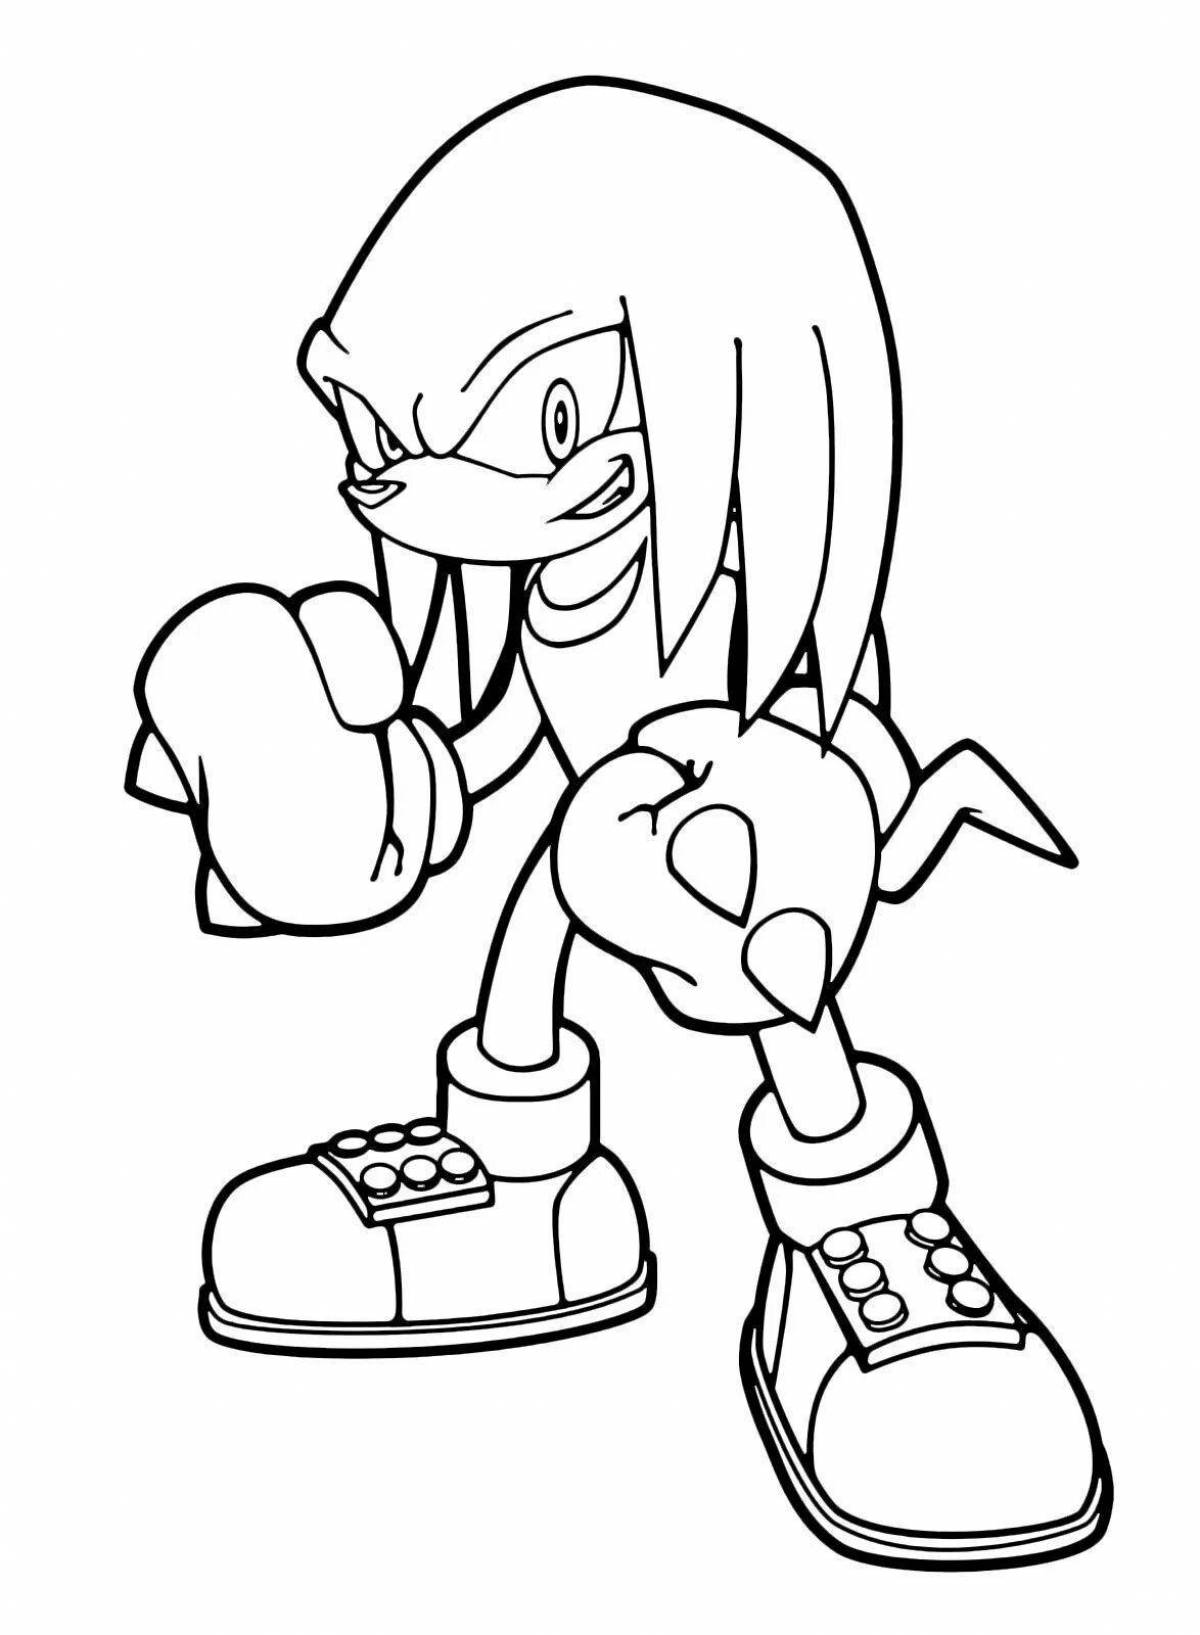 Knuckles #8